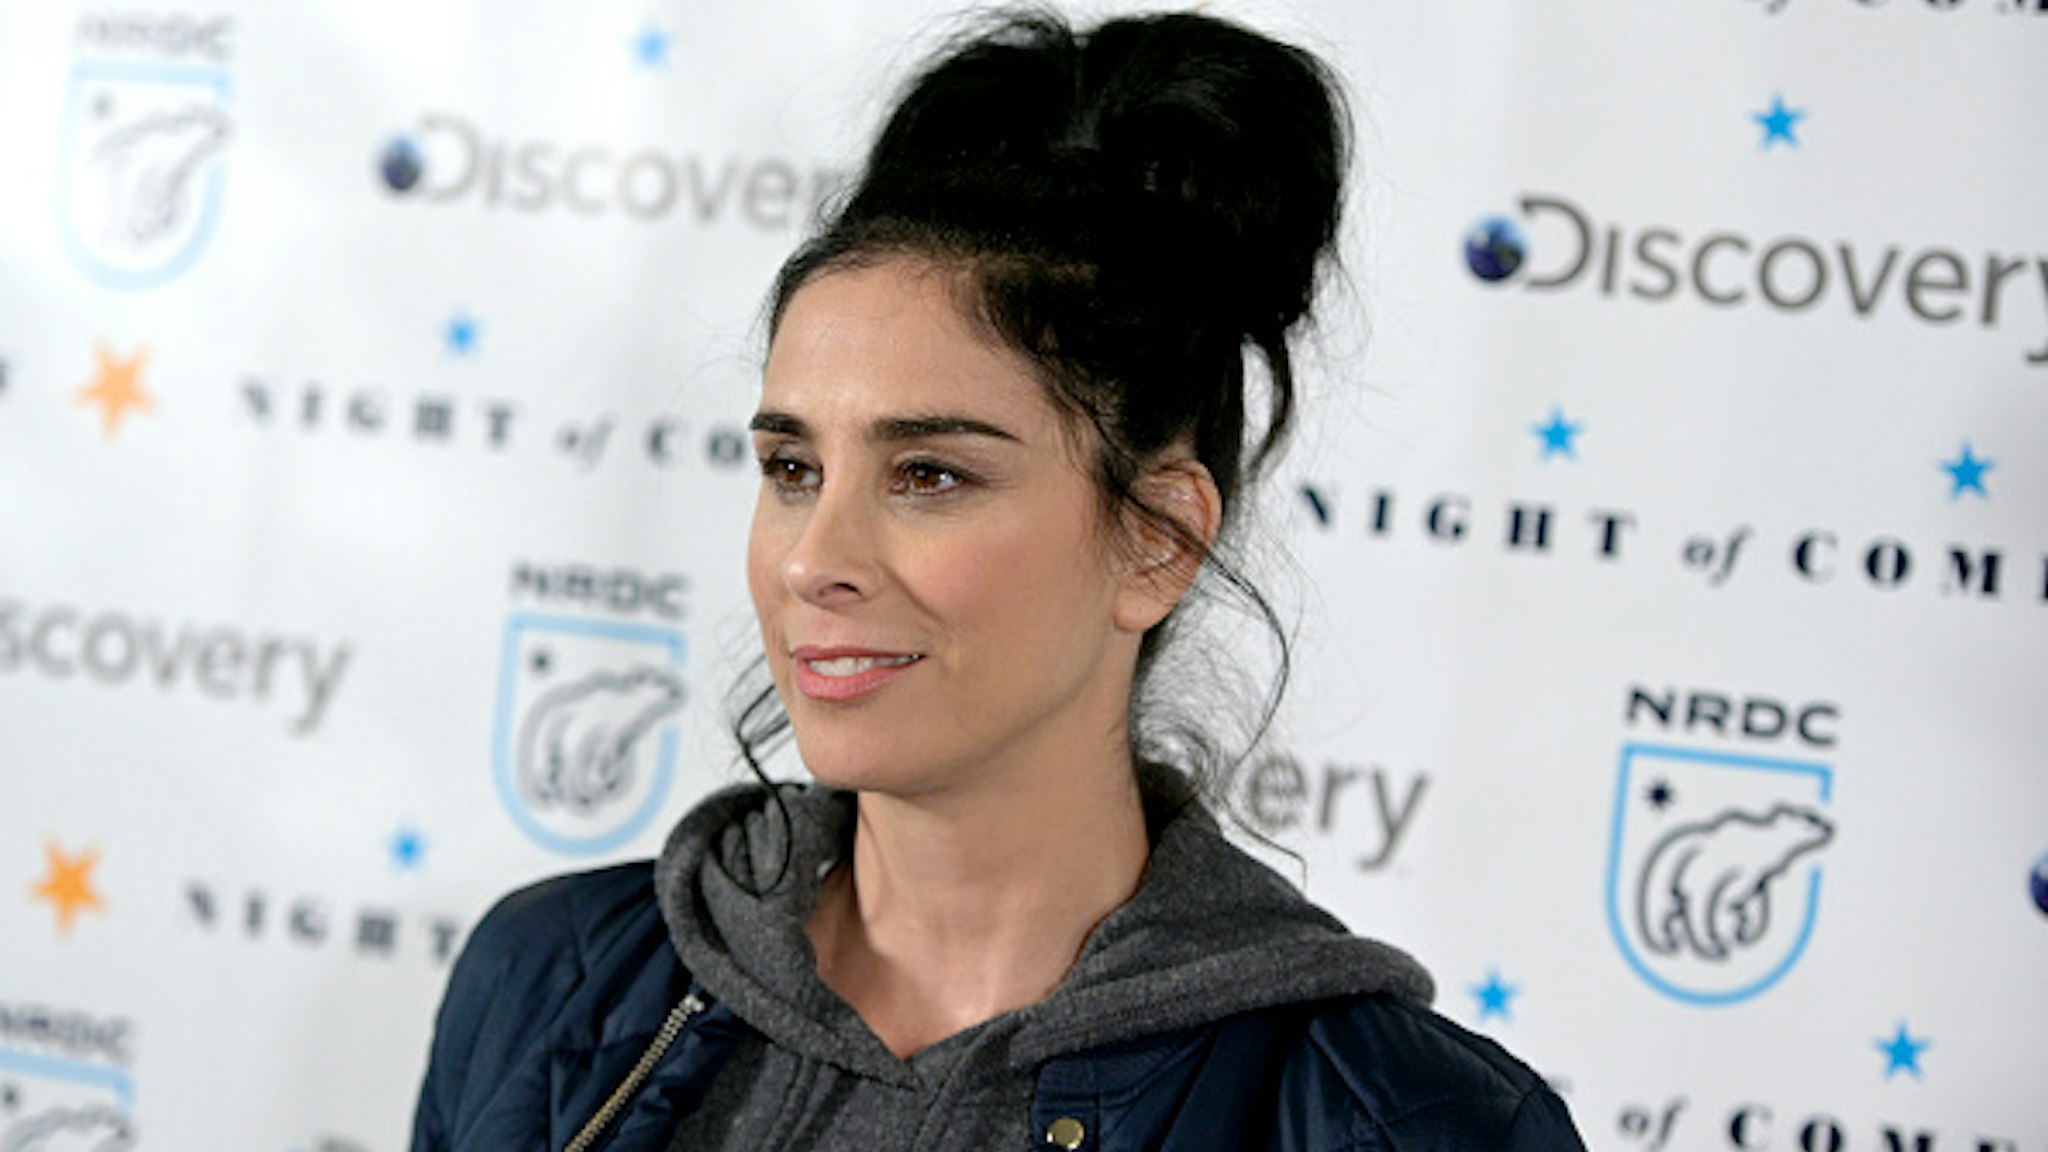 Sarah Silverman attends NRDC's "Night of Comedy" Benefit, in partnership with Discovery, Inc. hosted by Seth Meyers on April 30, 2019 in New York City.